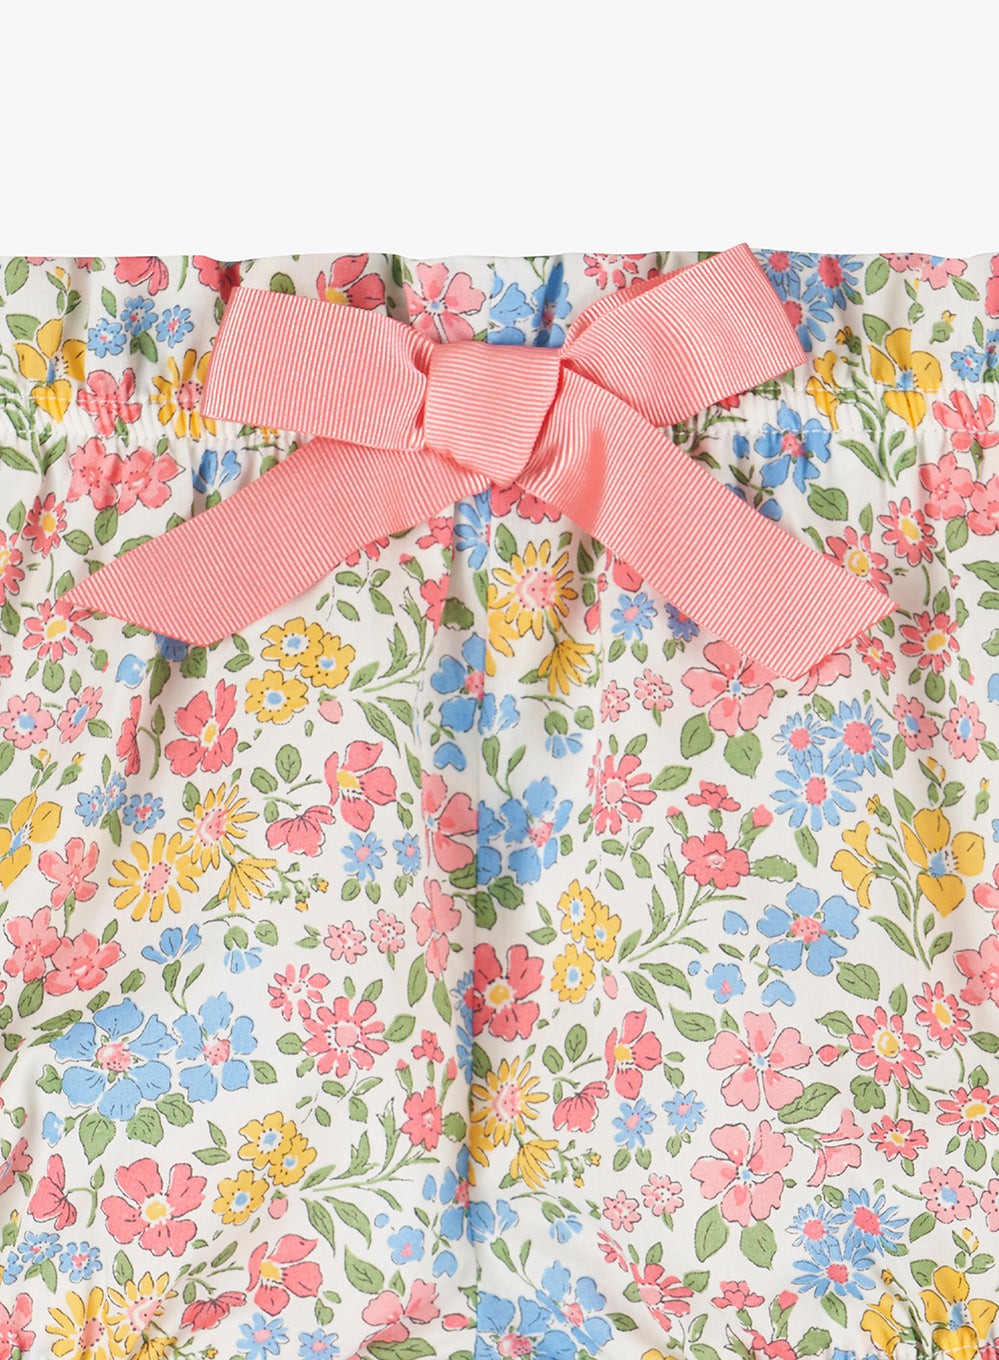 Lily Rose Bloomers Little Annabelle Bloomers